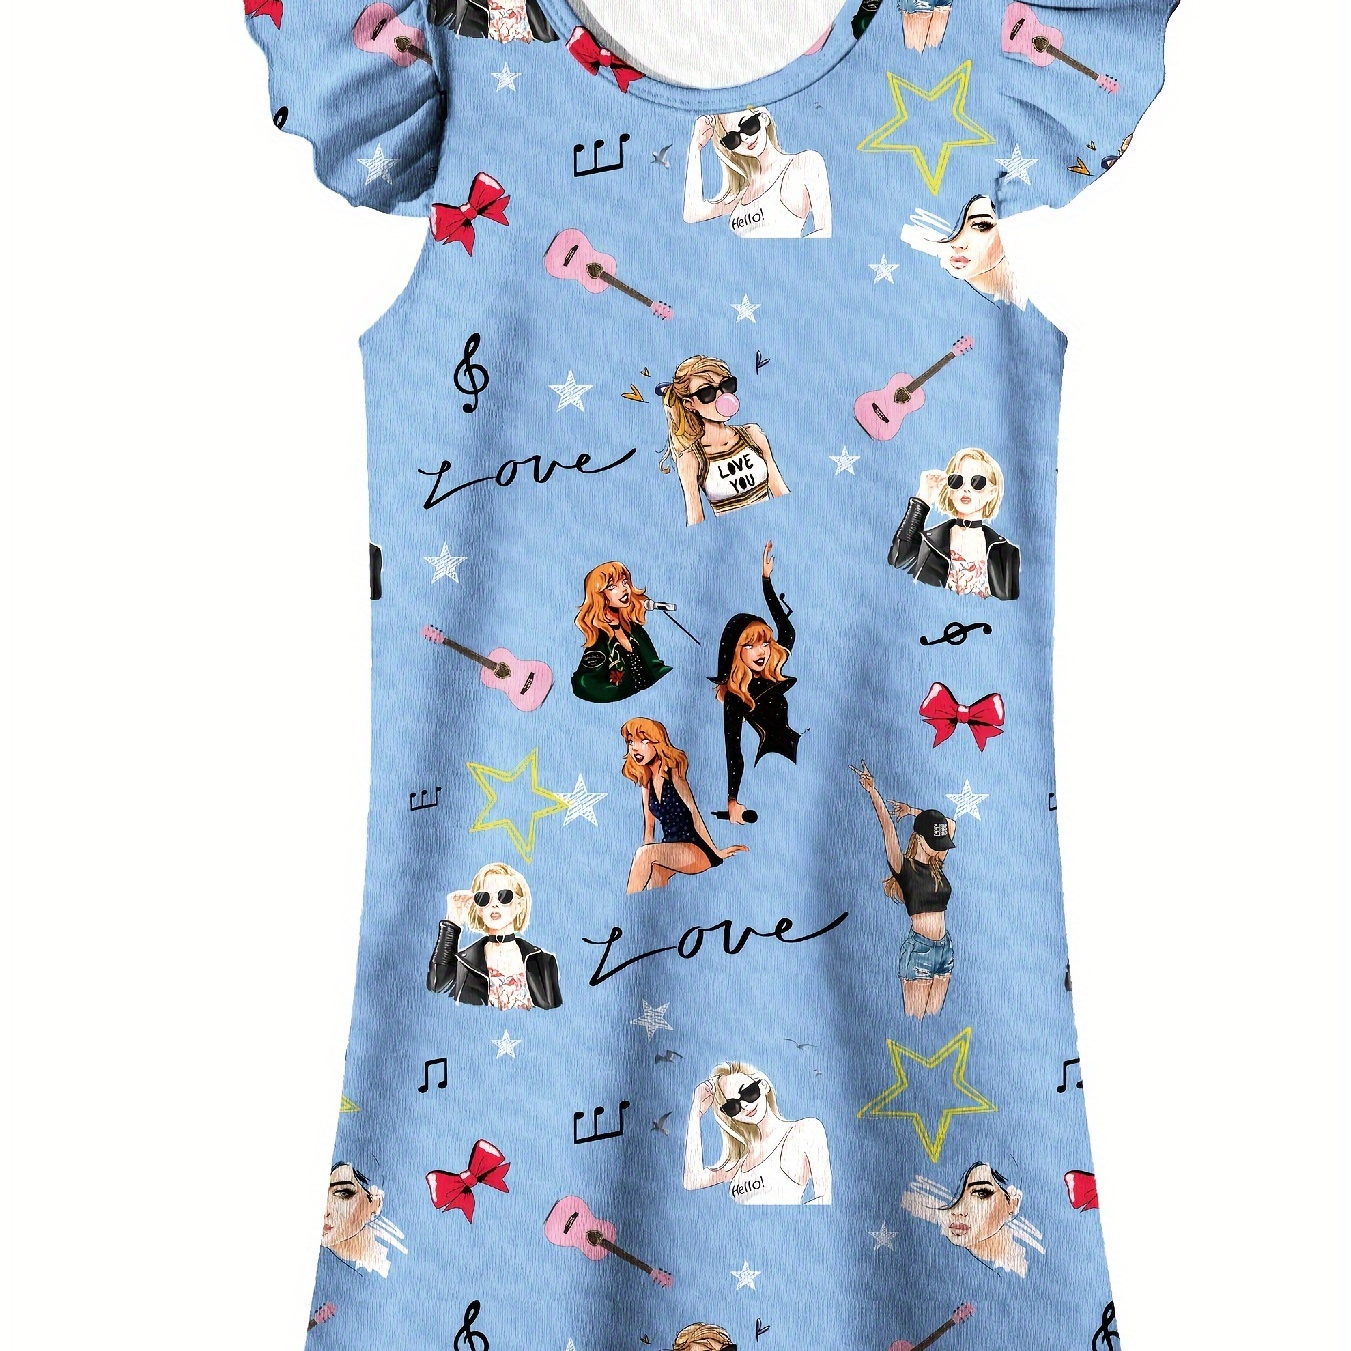 

Girl's Dress Animated Print Casual Dress - Comfortable, Suitable For Spring And Summer Seasons, Easy To Care For And Stretchy Fabric Suitable For Ages 4-12